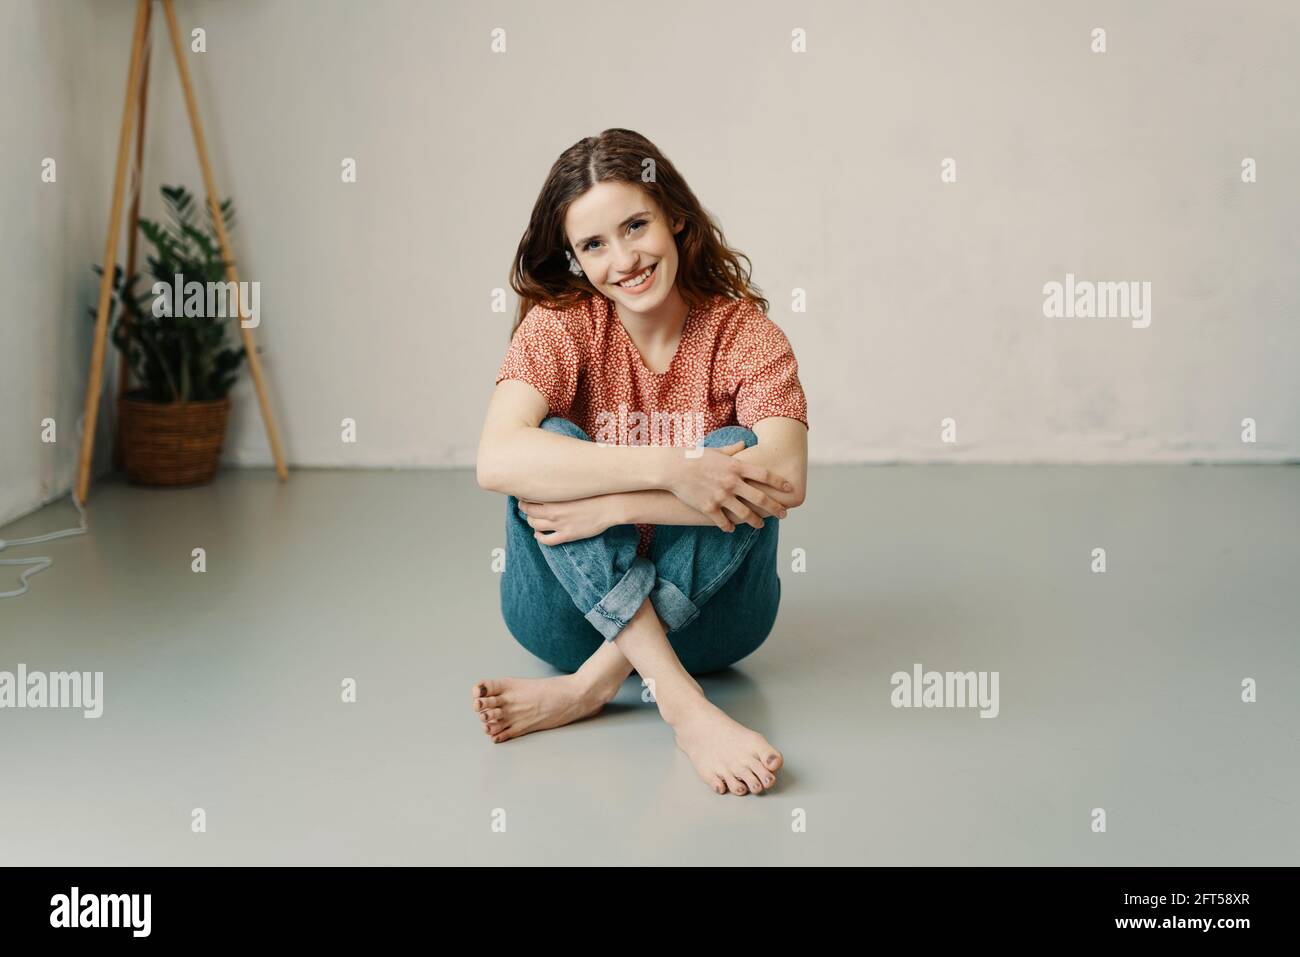 Sweet barefoot young woman with a lovely kind smile sitting on the floor in her jeans relaxing looking at the camera Stock Photo